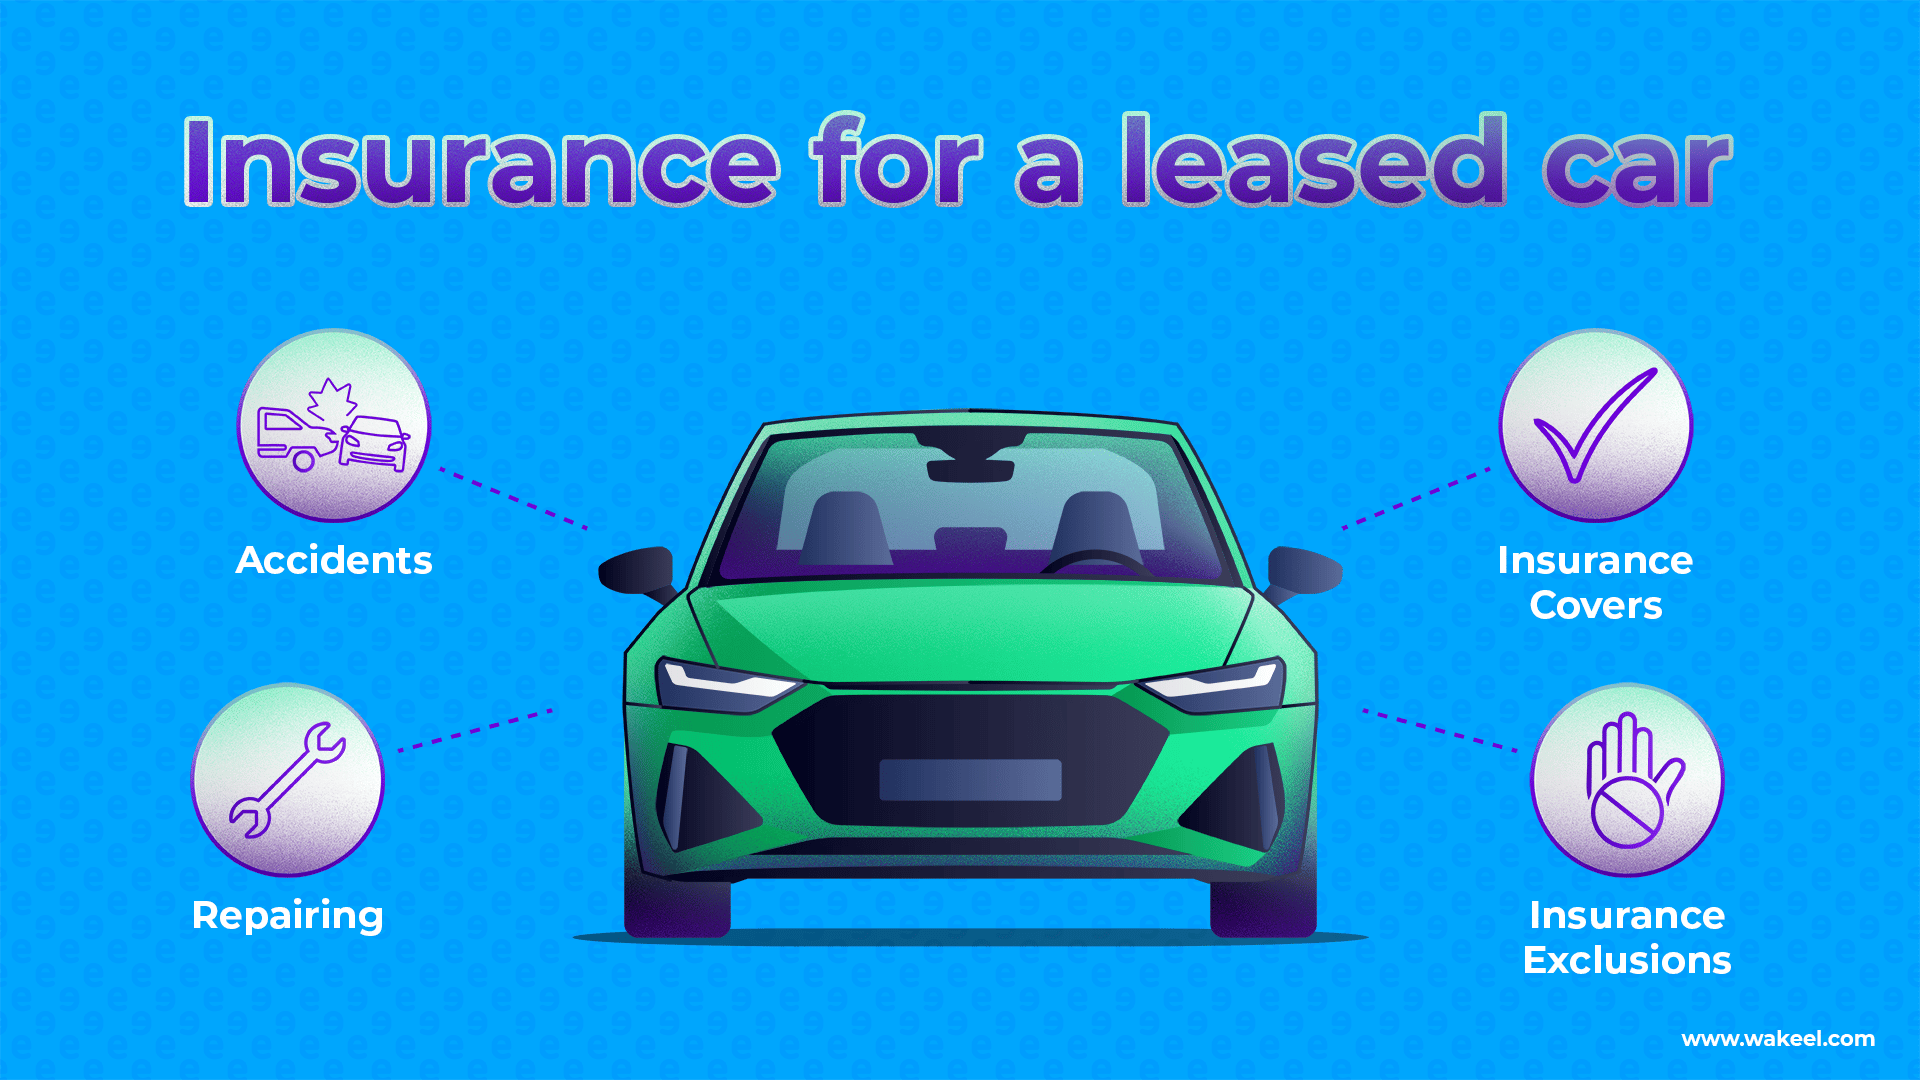 Insurance for a Leased Car